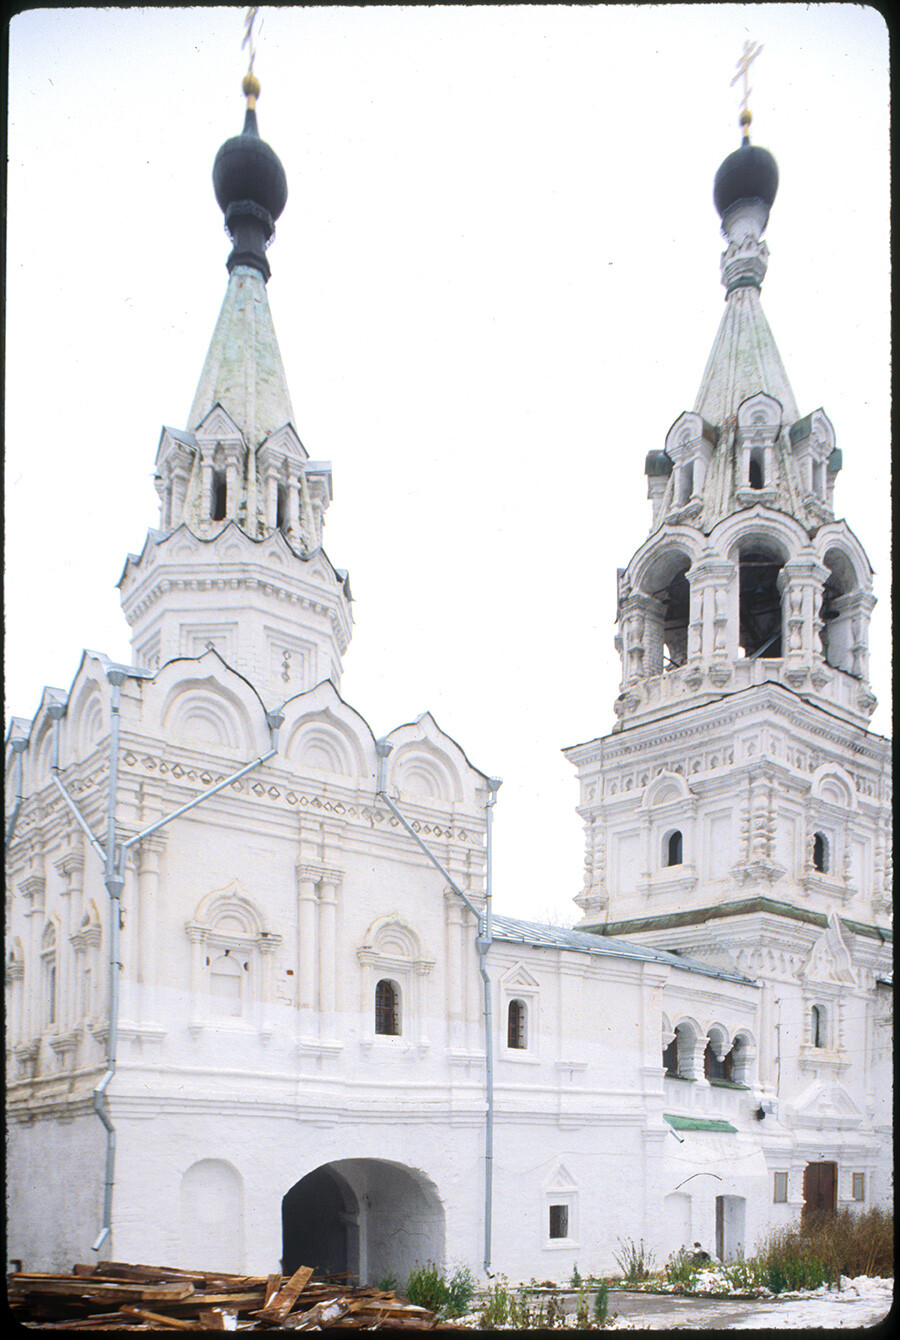 Trinity Convent. Bell tower & Church of Kazan Icon of the Virgin, southwest view. October 26, 2001